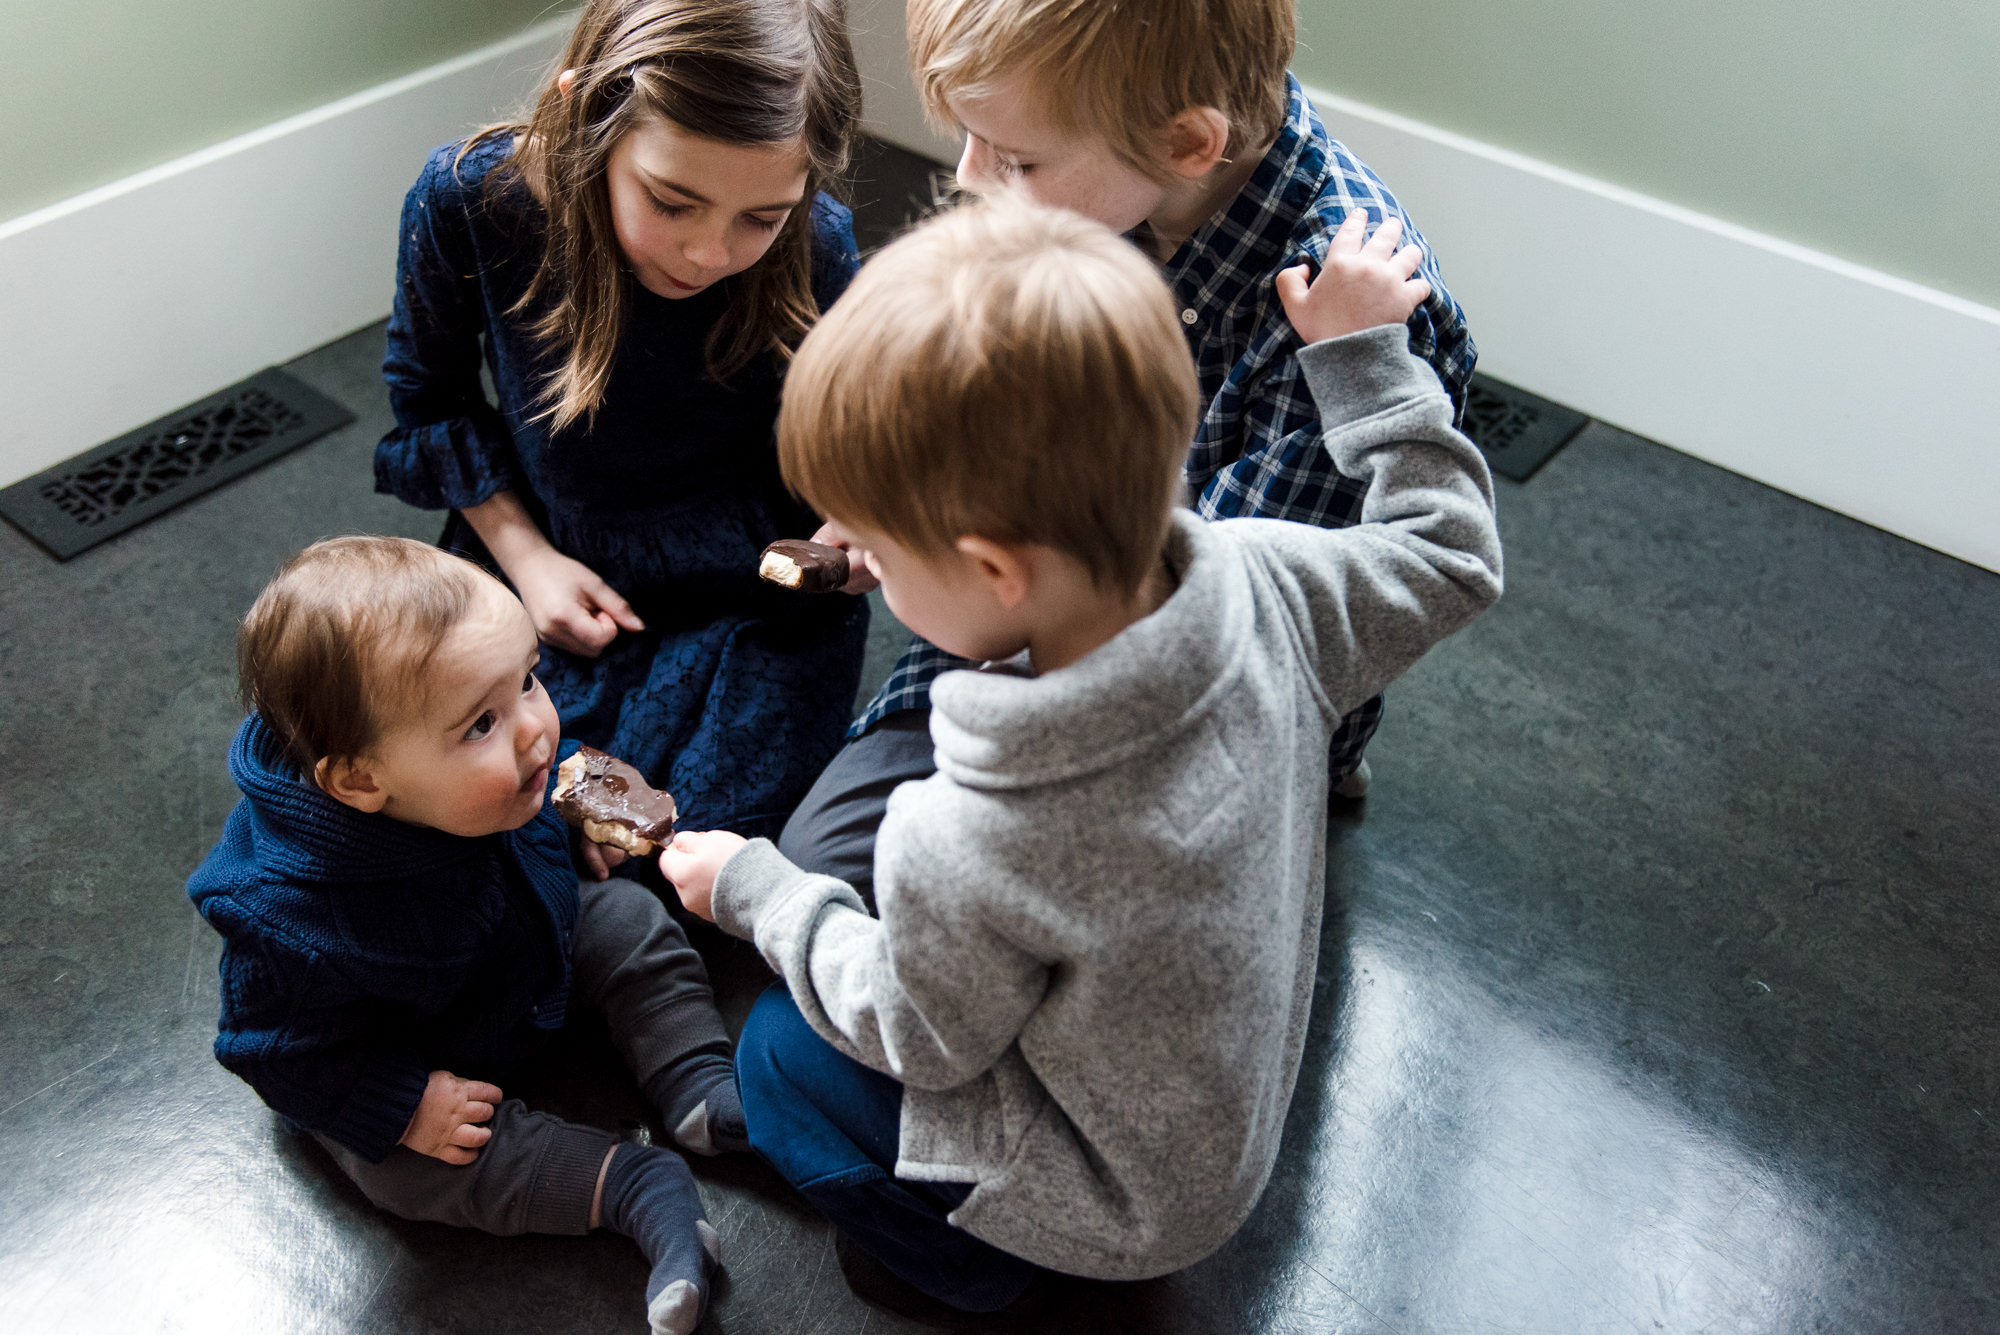 Siblings eat ice cream in their Edmonton home during an Edmonton Family Photography session